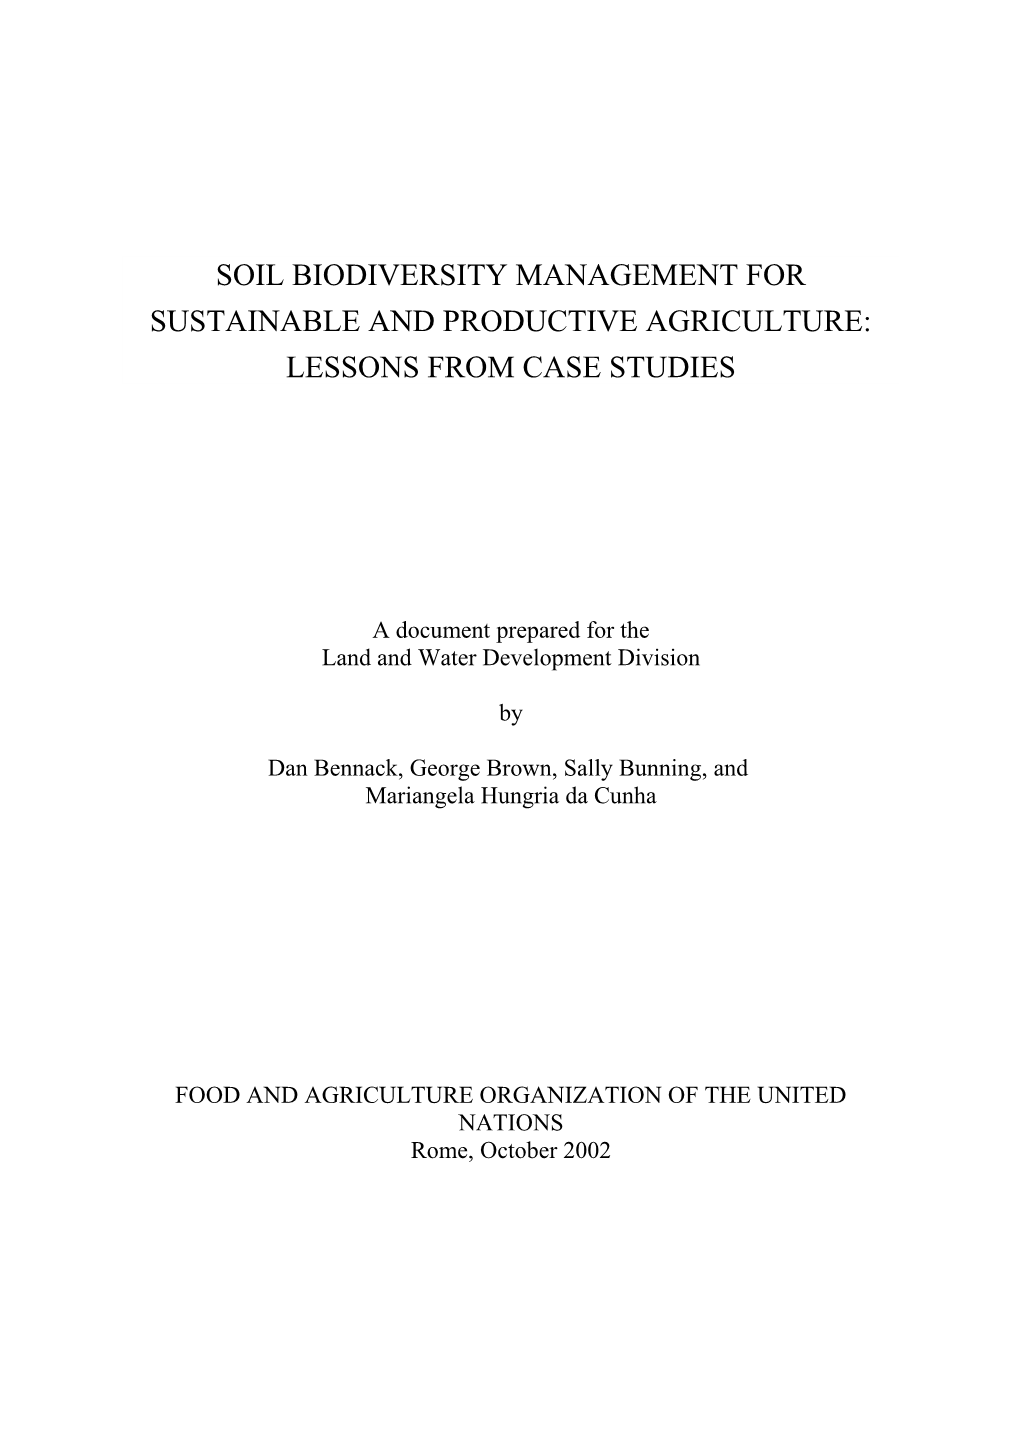 Soil Biodiversity Management for Sustainable and Productive Agriculture: Lessons from Case